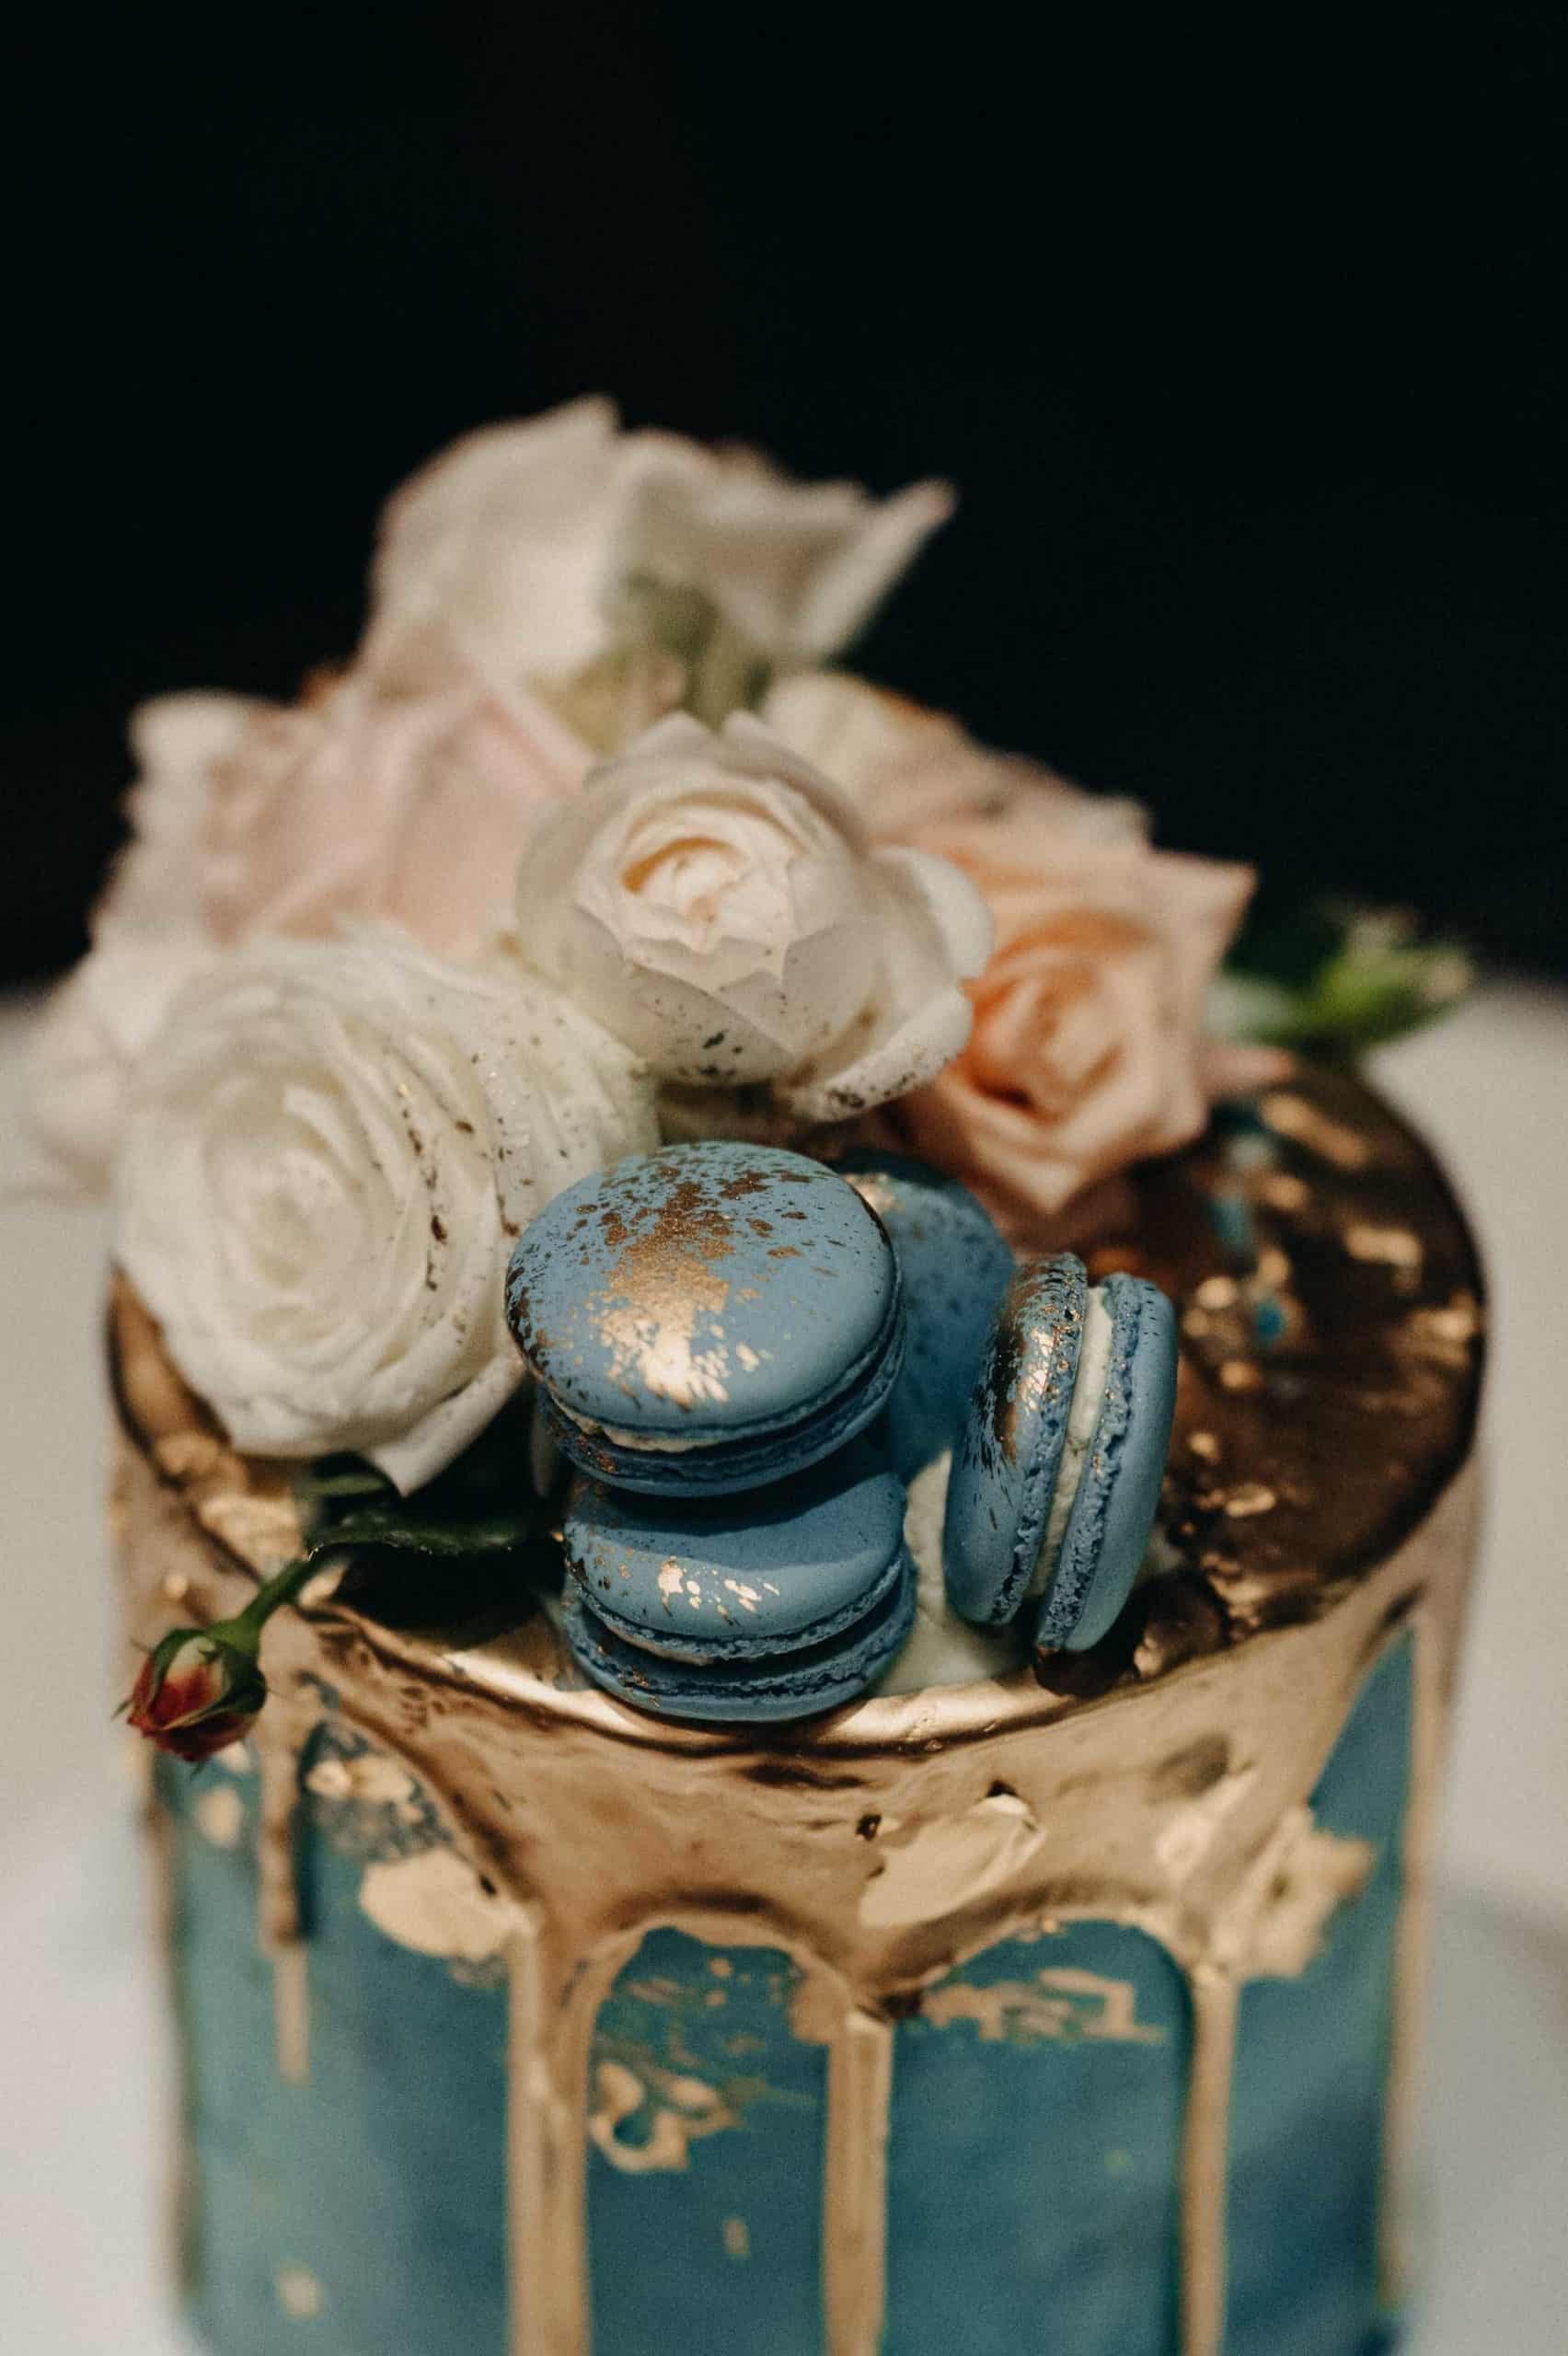 best wedding cakes of 2019 - blue cake with gold drip